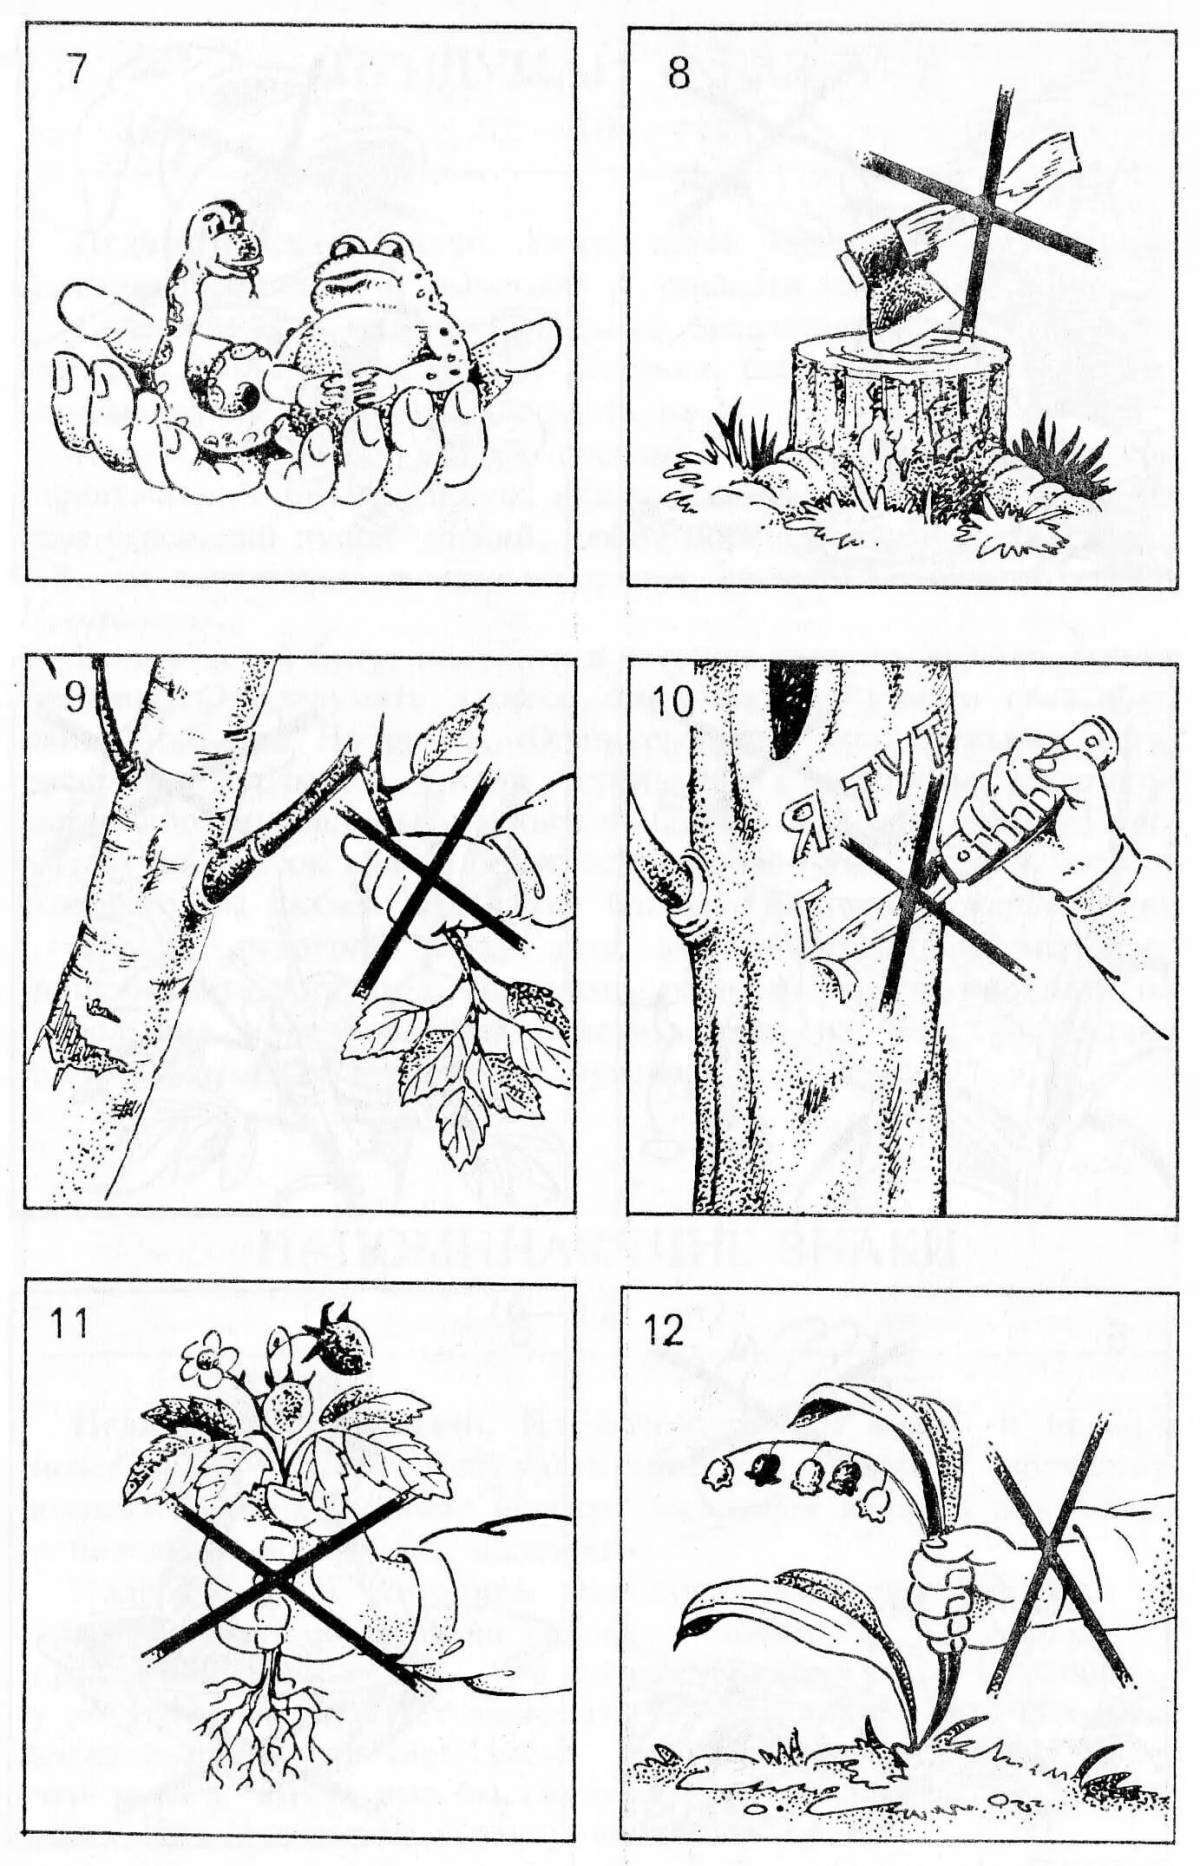 Composed coloring rules of behavior in nature